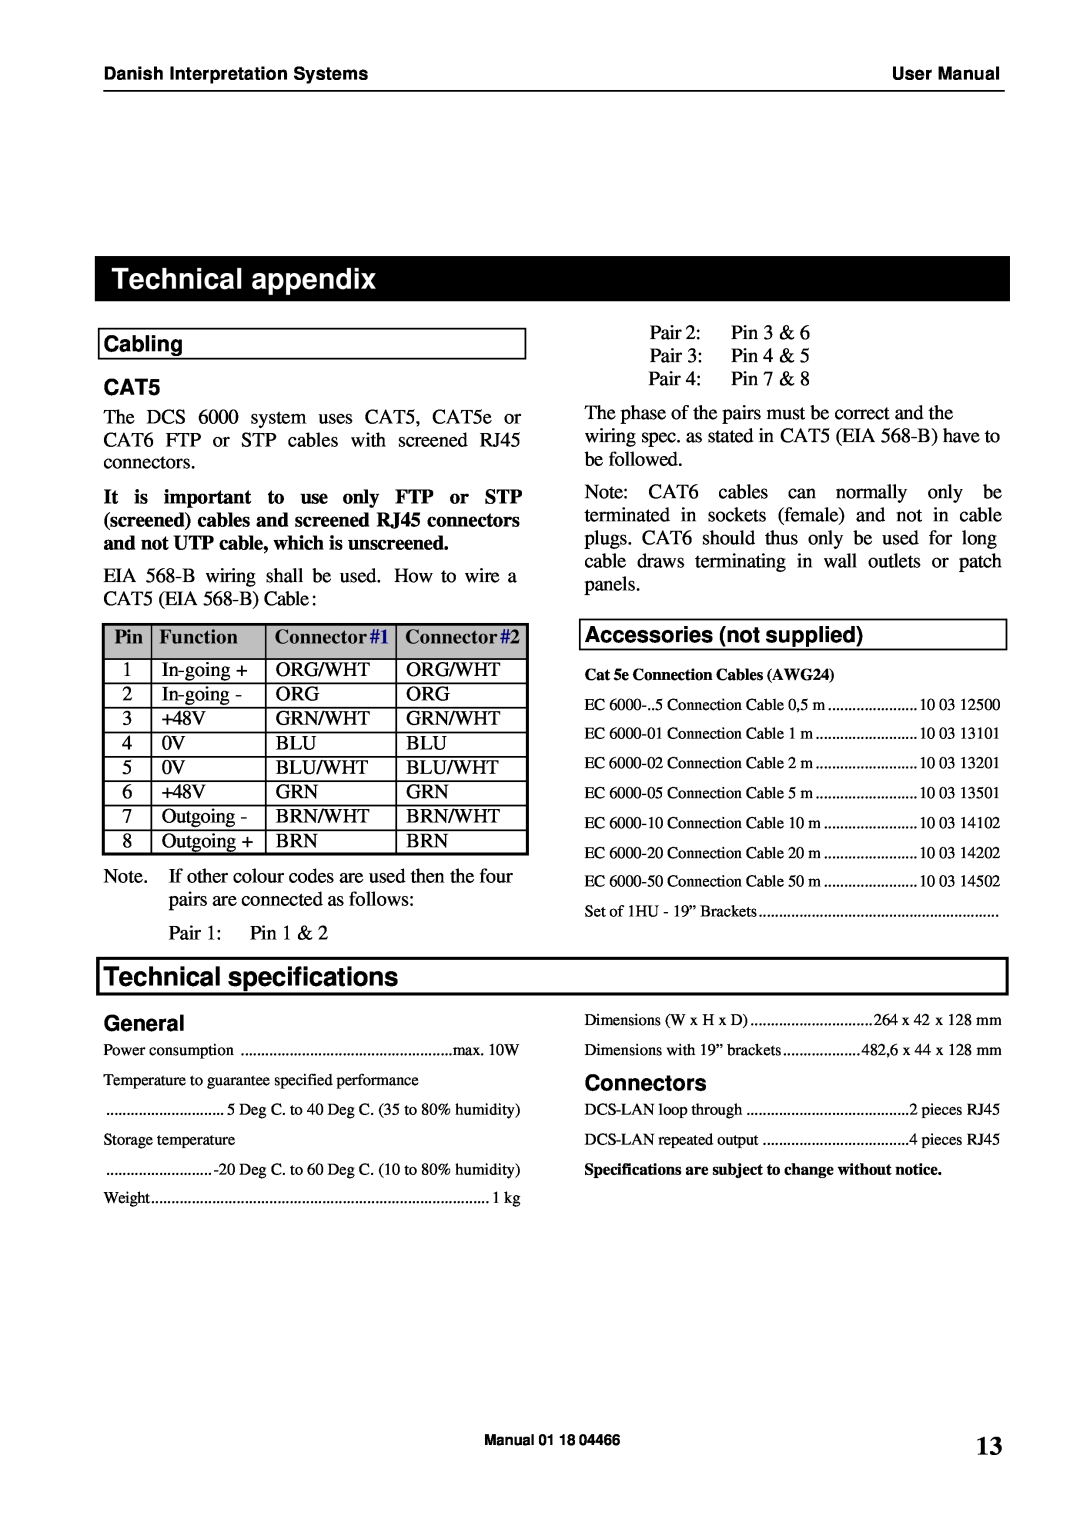 Listen Technologies RP 6004 Technical appendix, Technical specifications, Cabling CAT5, Accessories not supplied, General 